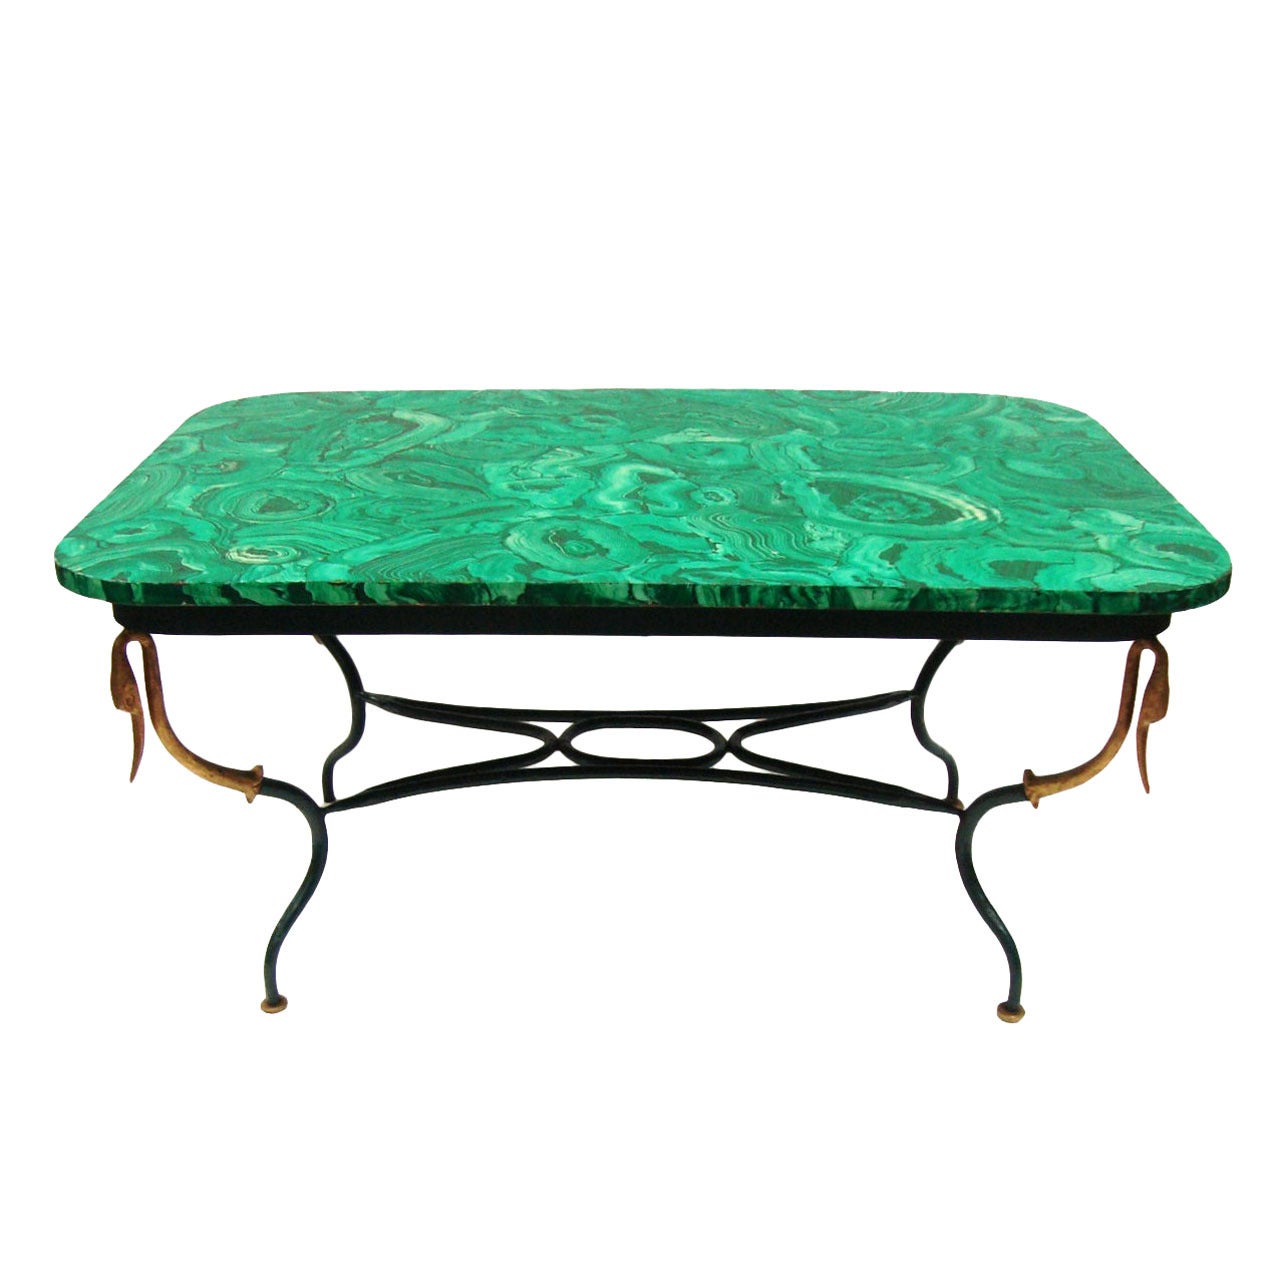 1940s French Faux Malachite and Wrought Iron Cocktail Table